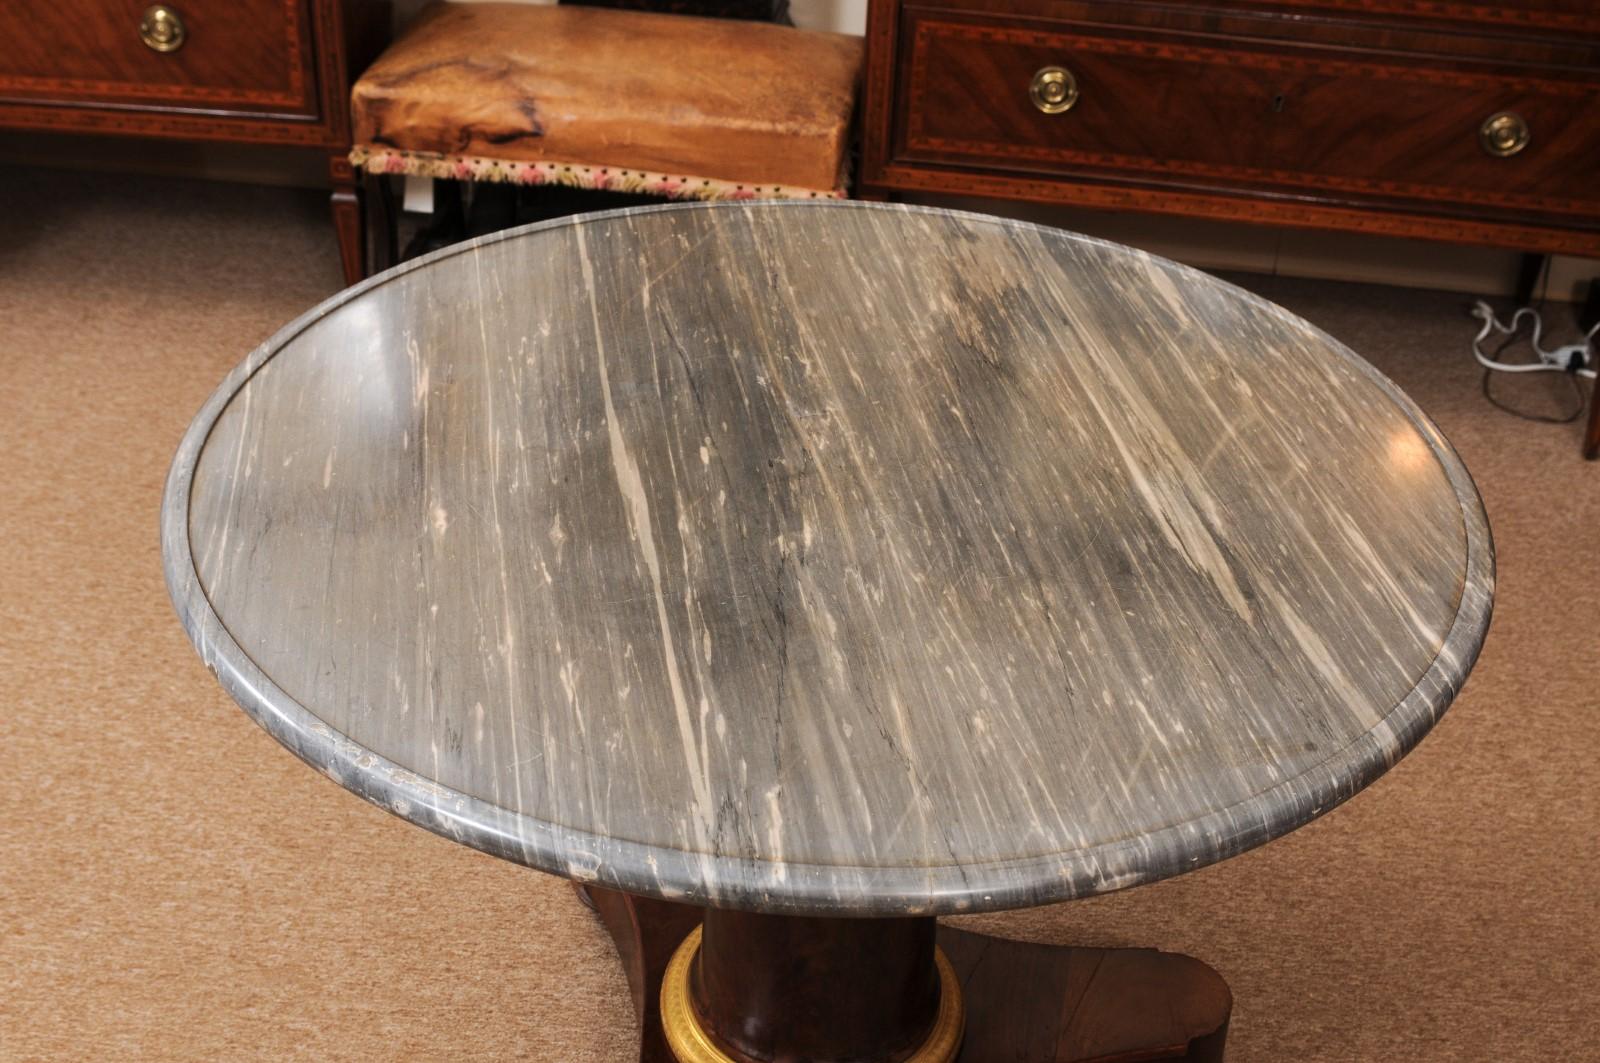  Early 19th C French Empire Walnut Center Table, Grey Marble Top & Ormolu Detail For Sale 3